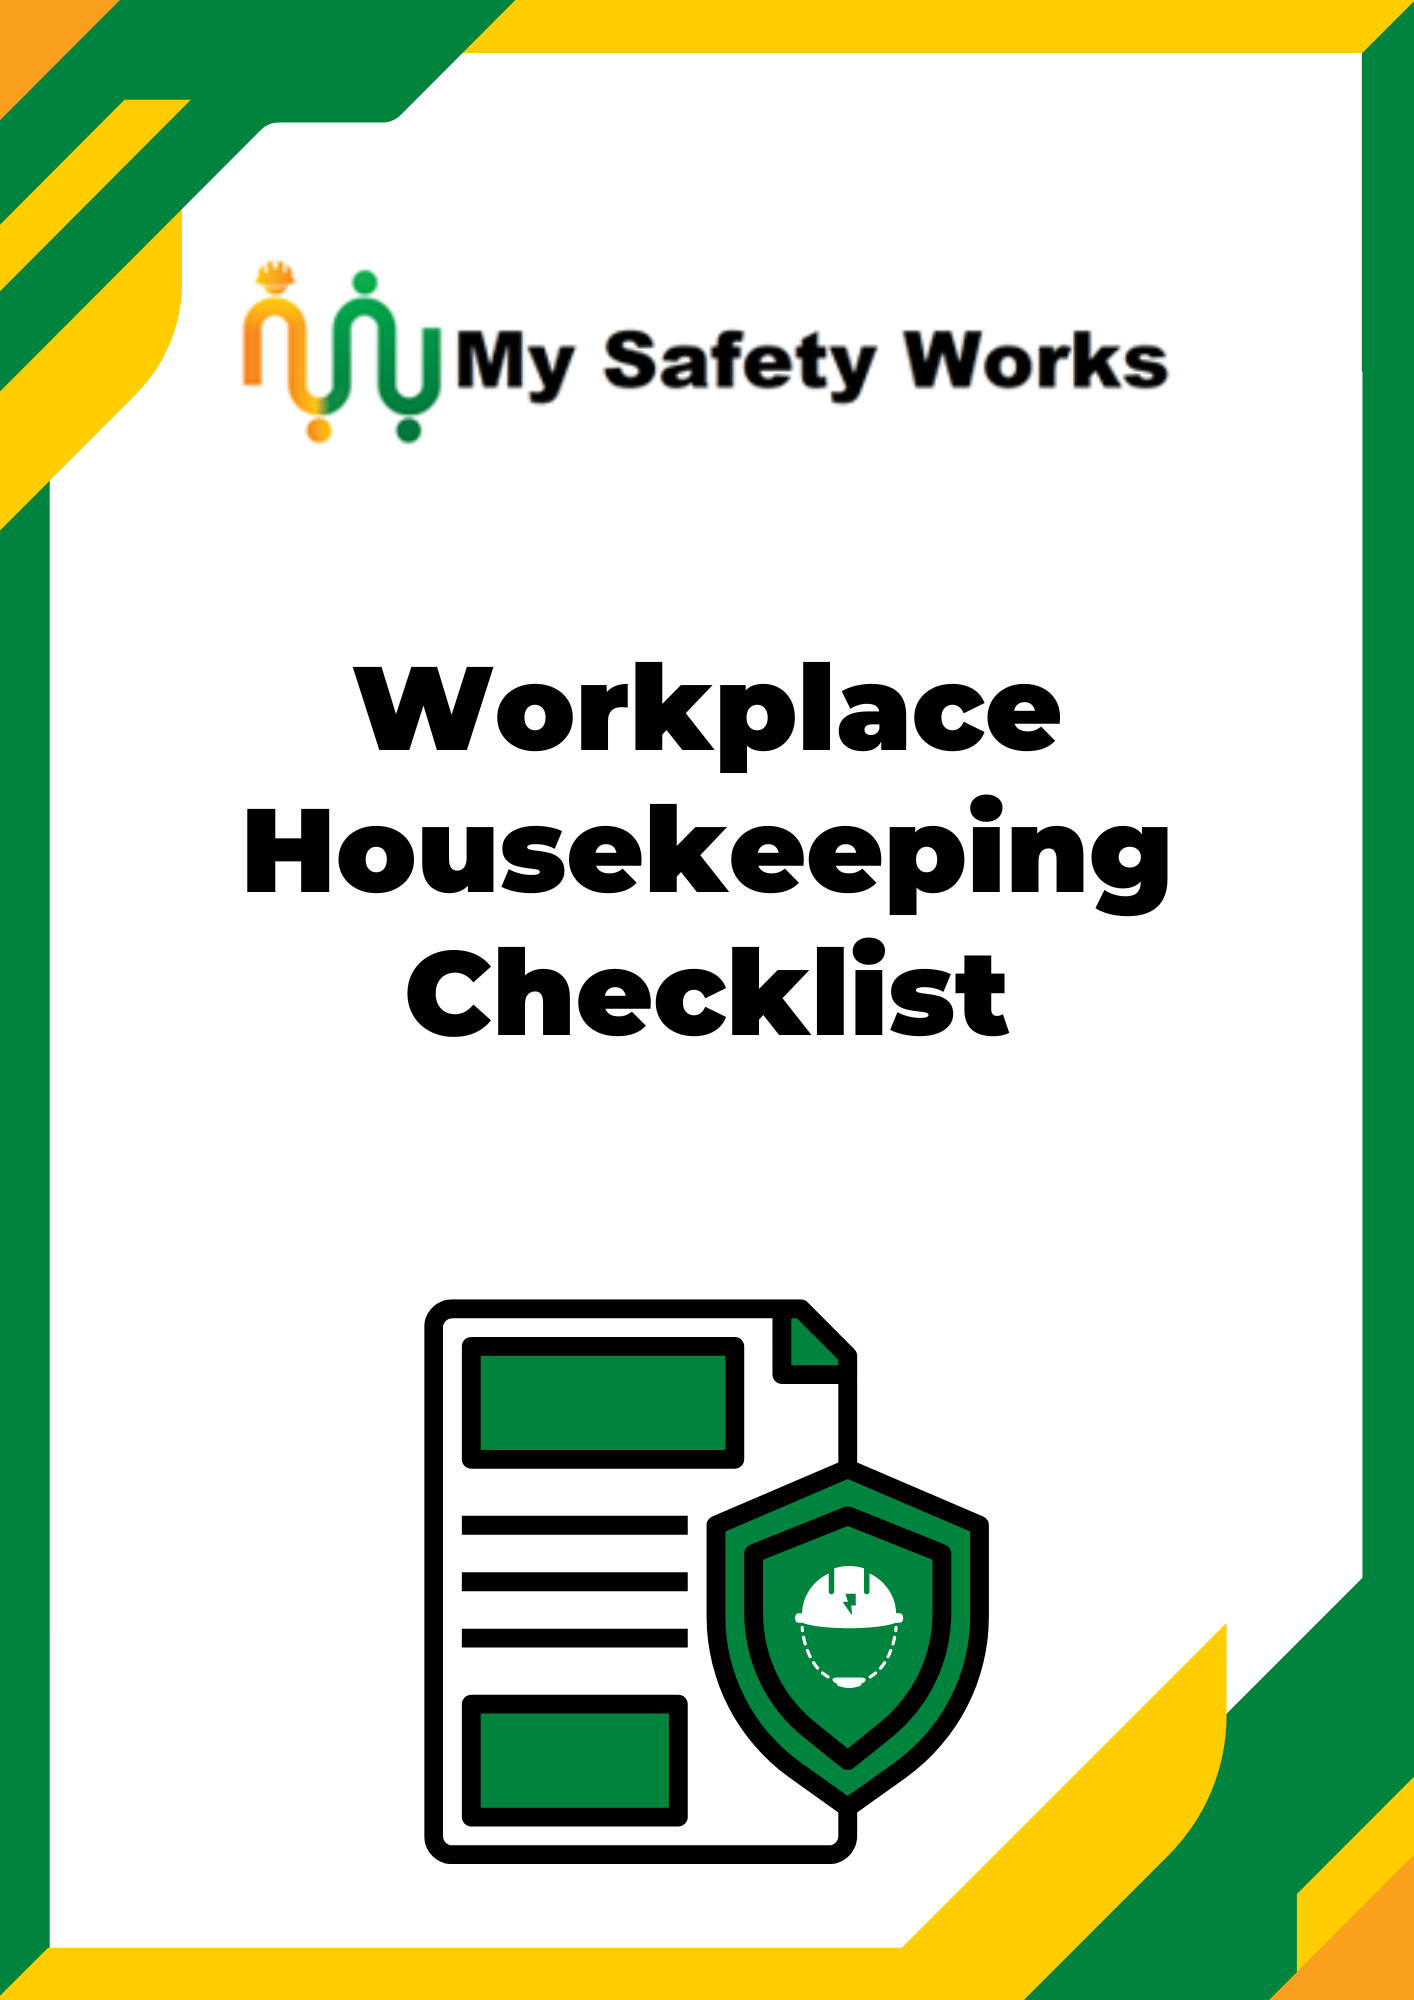 workplace housekeeping images